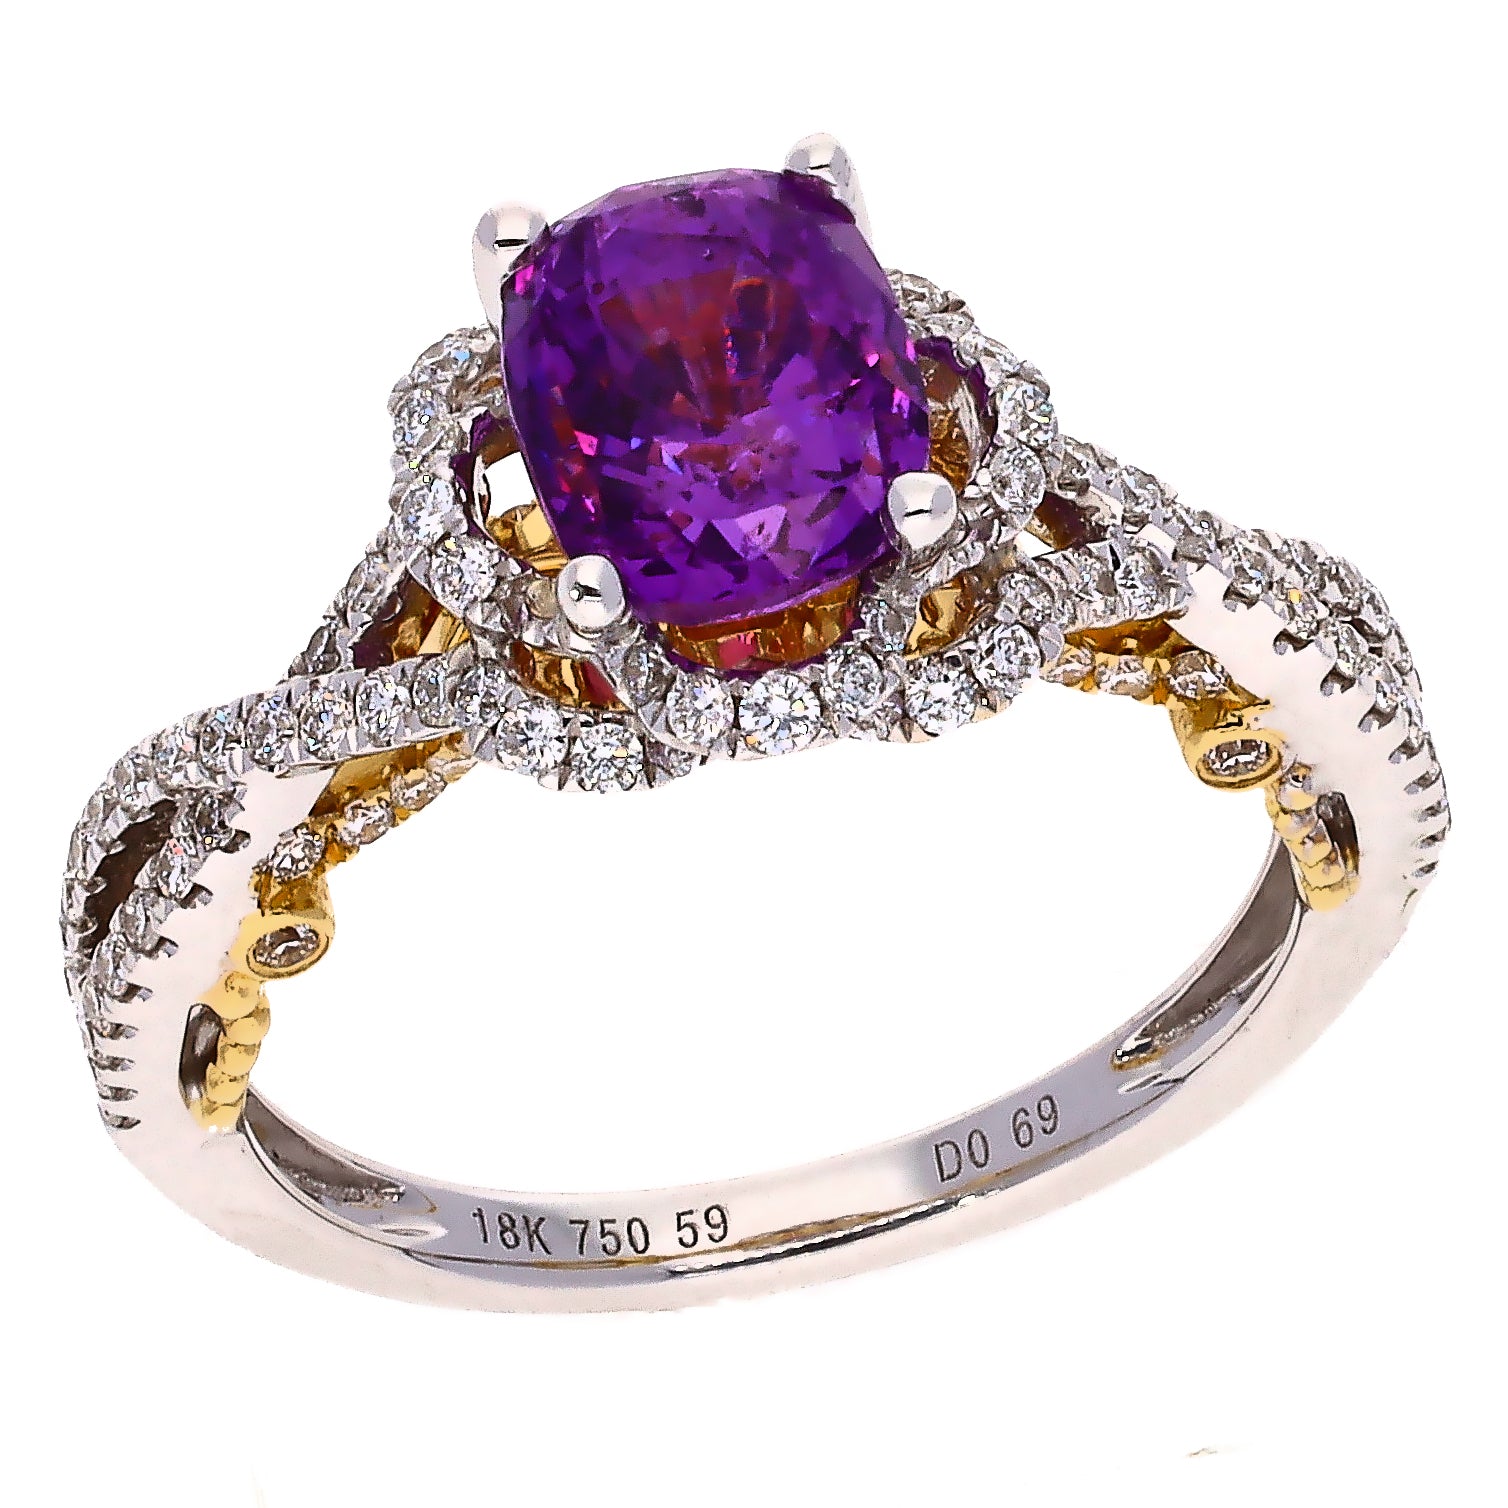 18K Two Tone White & Yellow Gold Oval Purple Sapphire and Diamond Ring Size 6.5